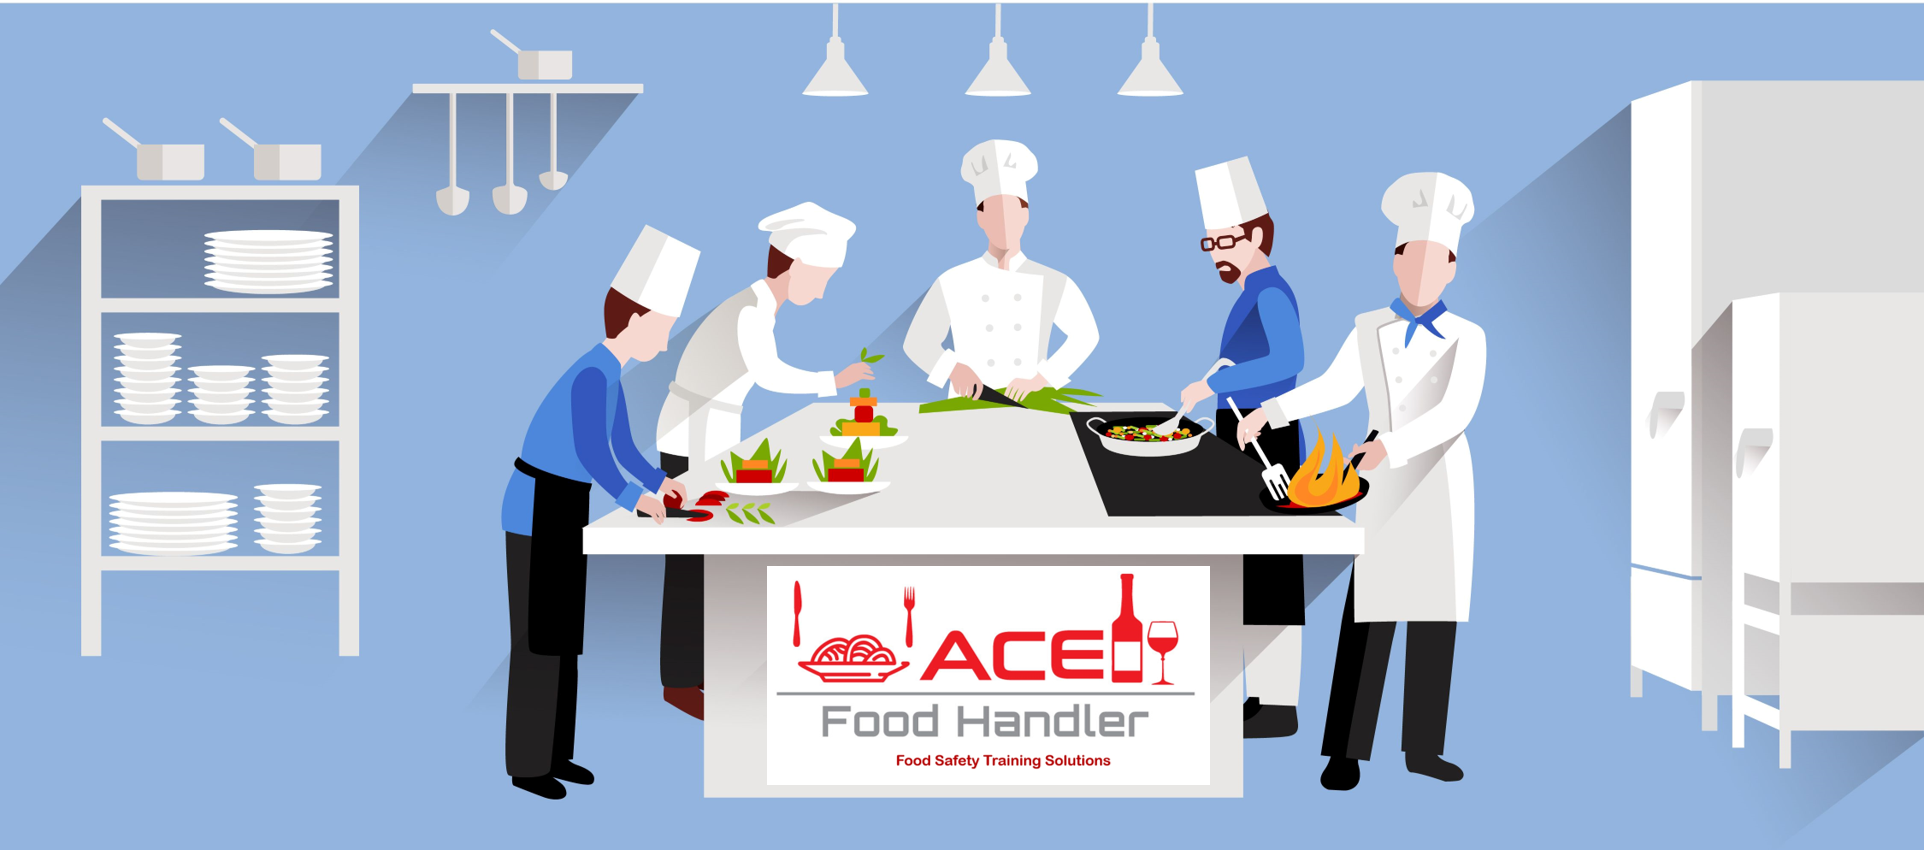 Arizona Food Handler Courses - ANSI Approved